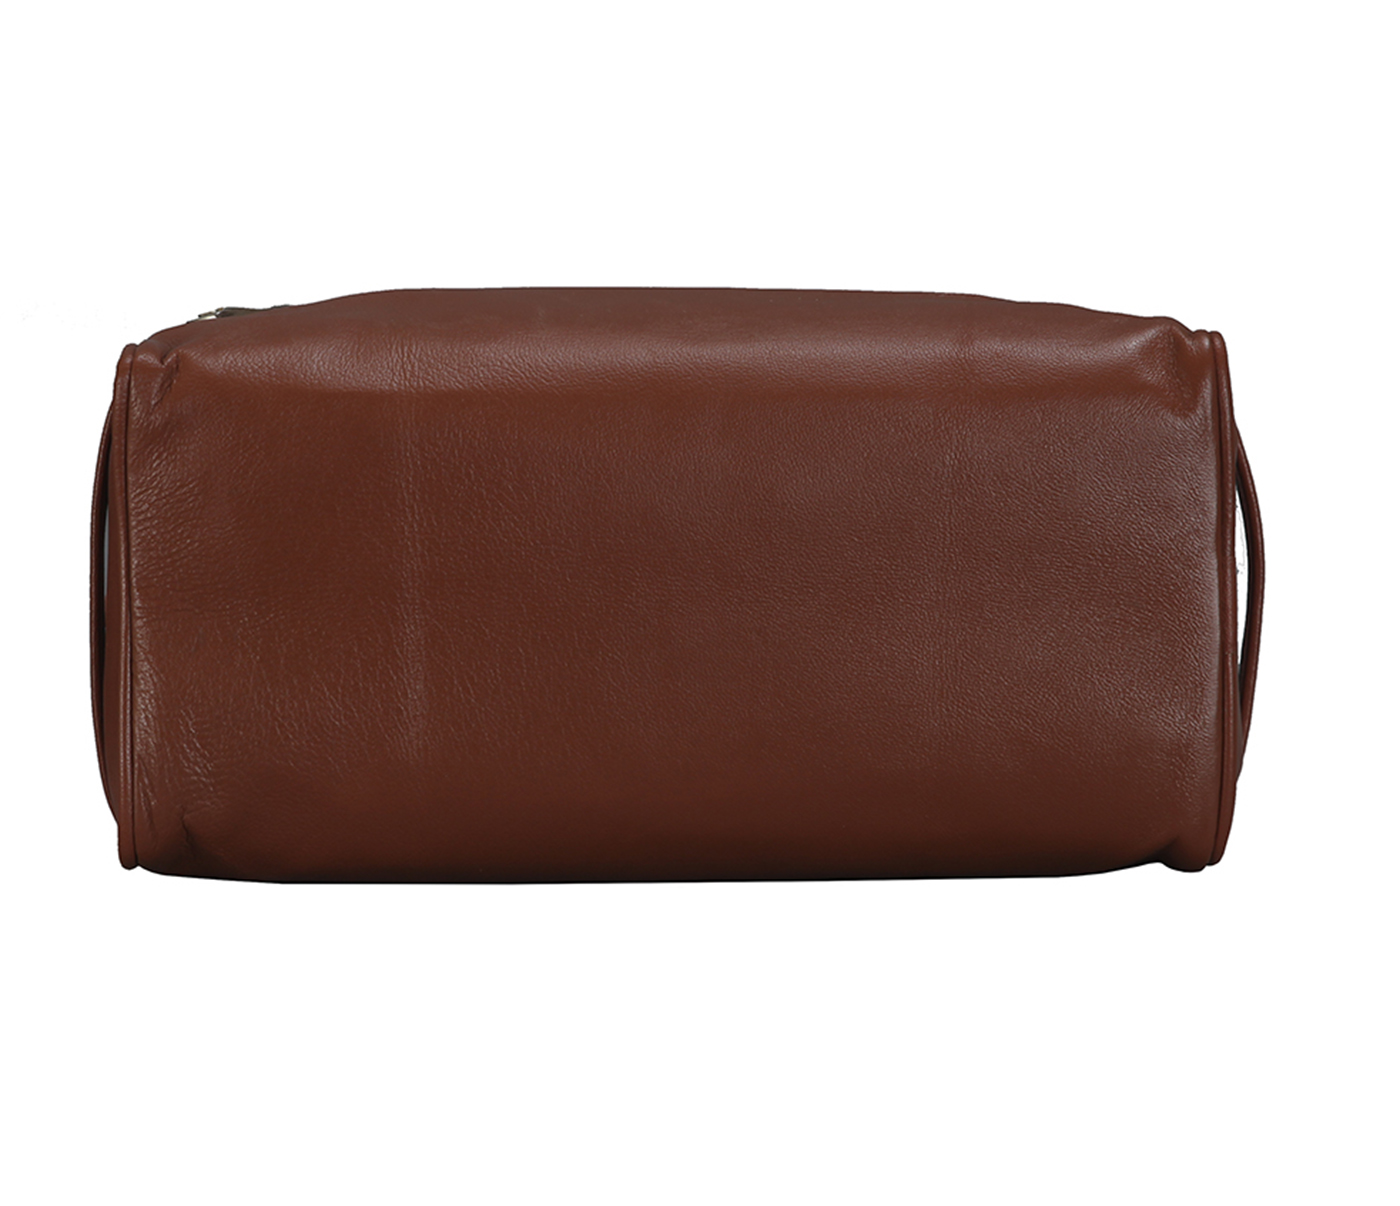 Travel Essential--Unisex Wash & Toiletry travel Bag in Genuine Leather - Tan